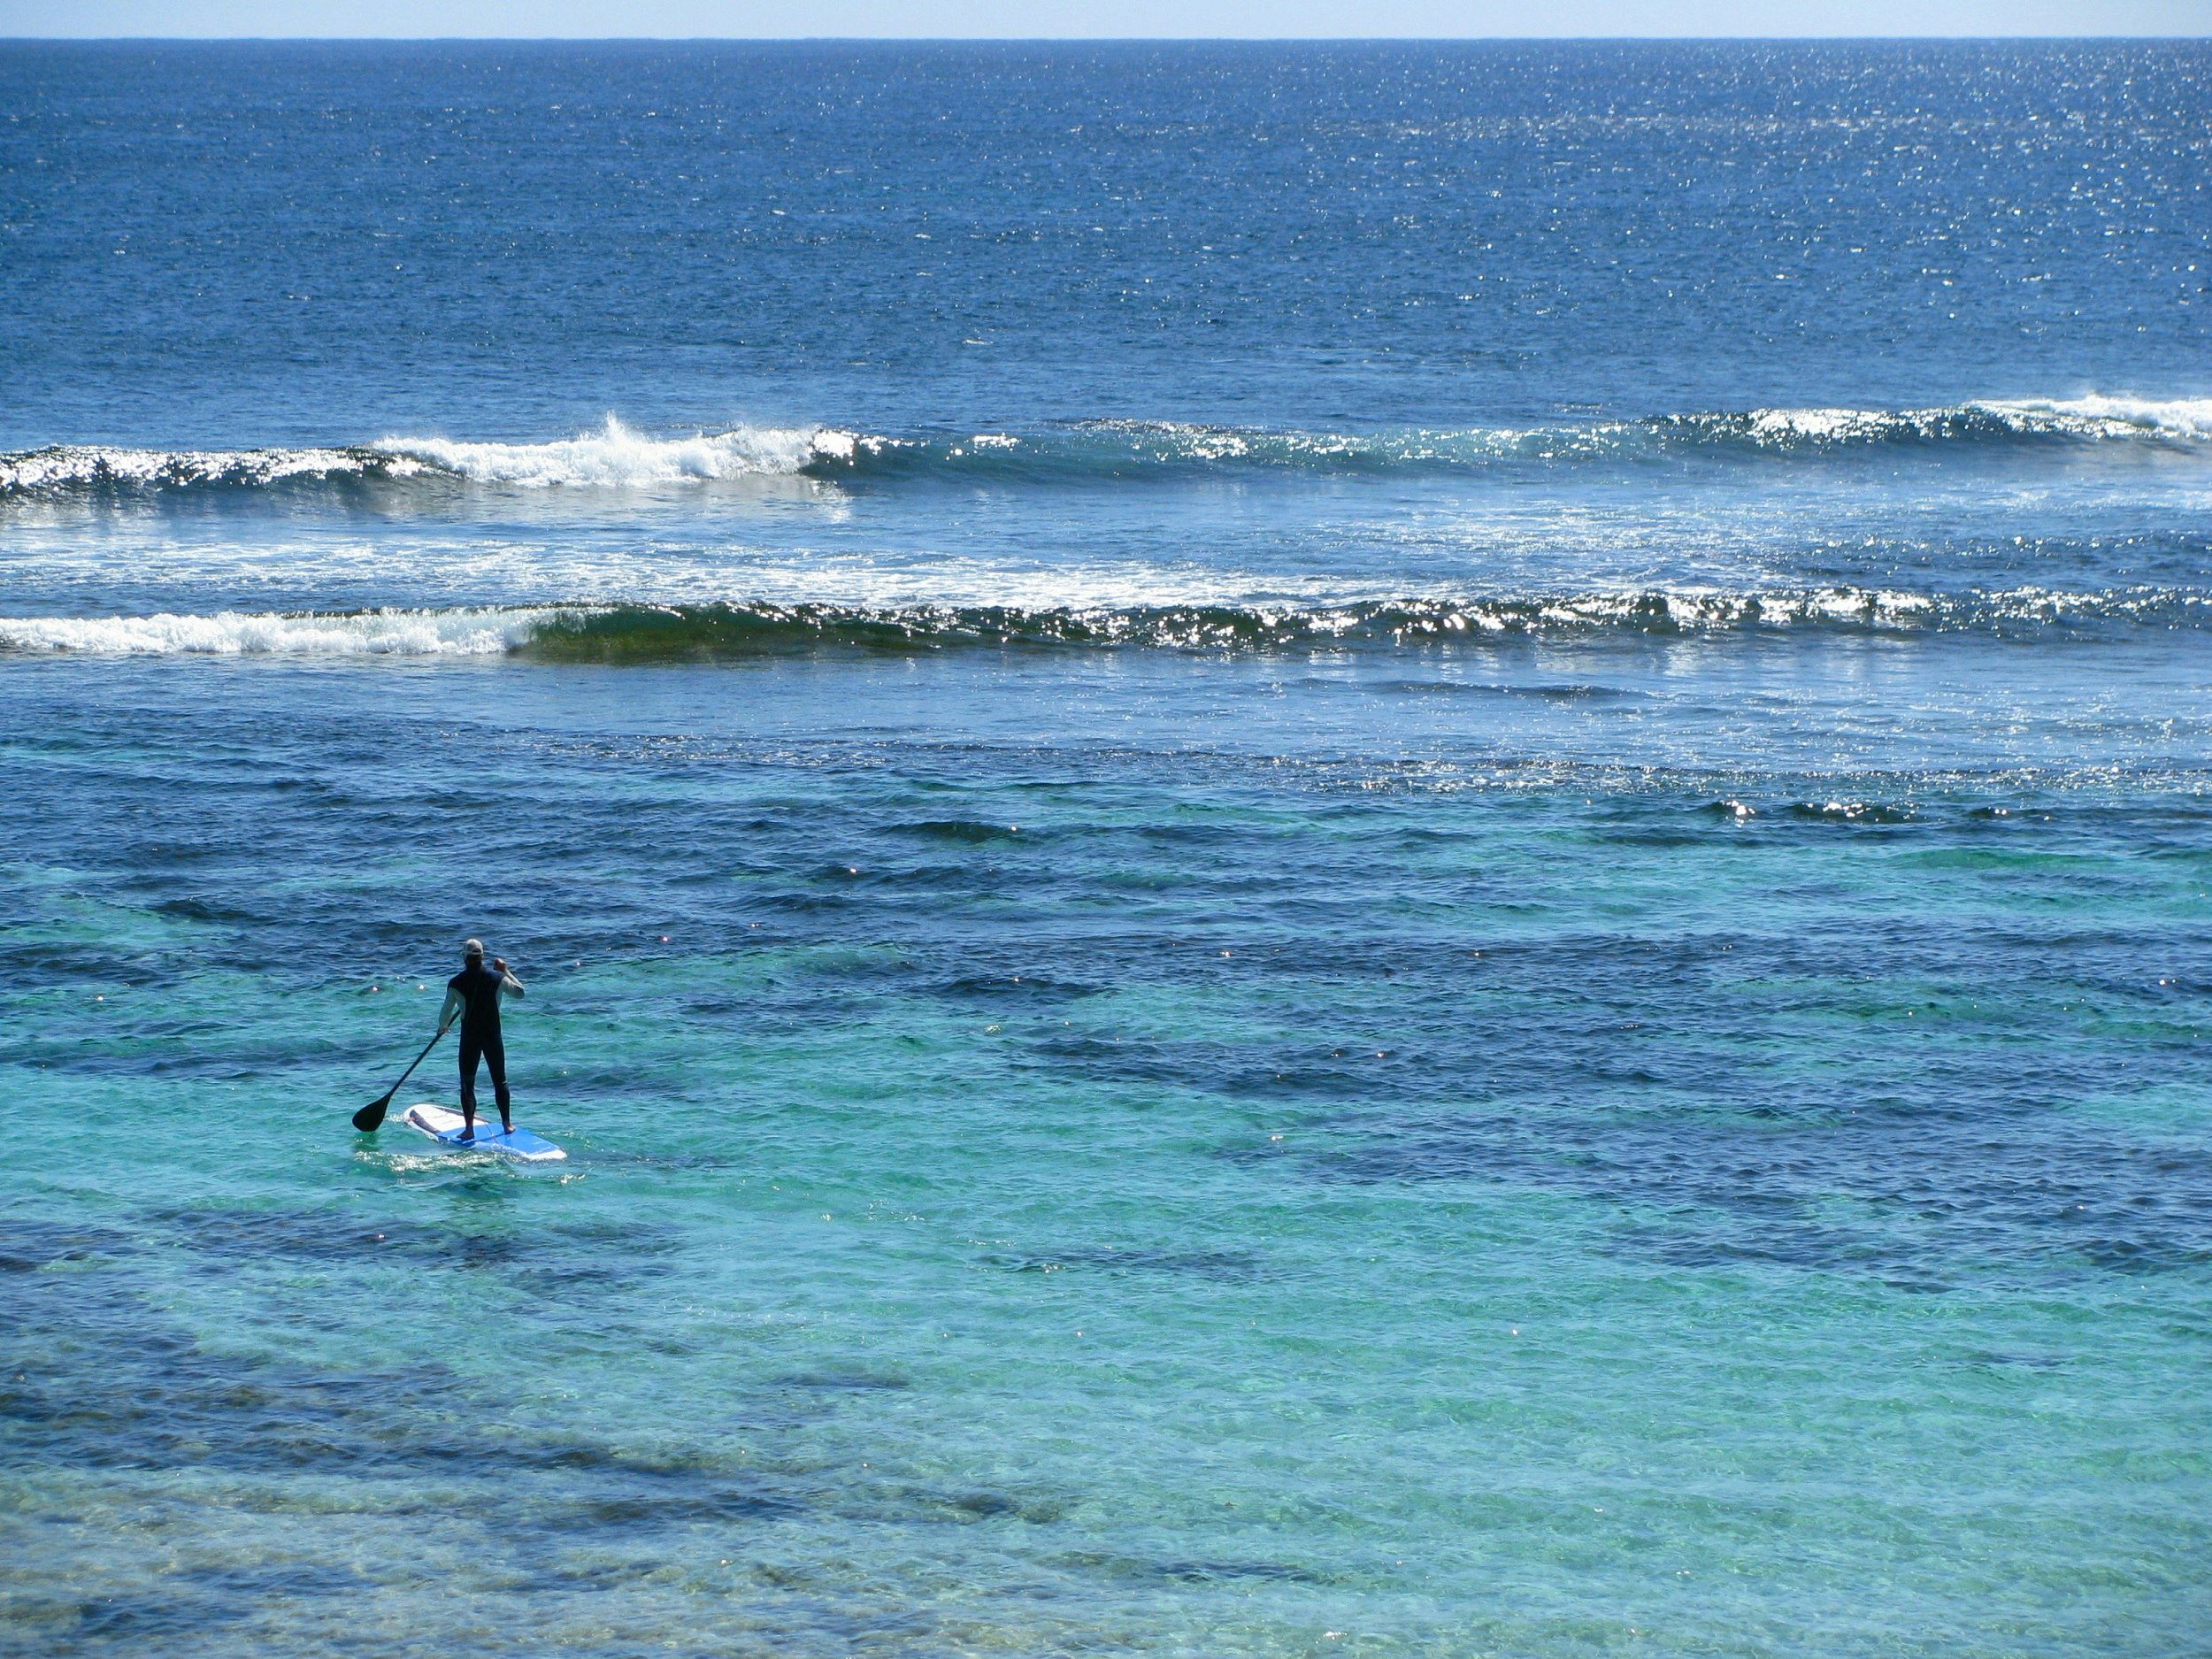 A lone person on a stand up paddle board heads through azure shallows towards small crashing waves on the edge of a reef.